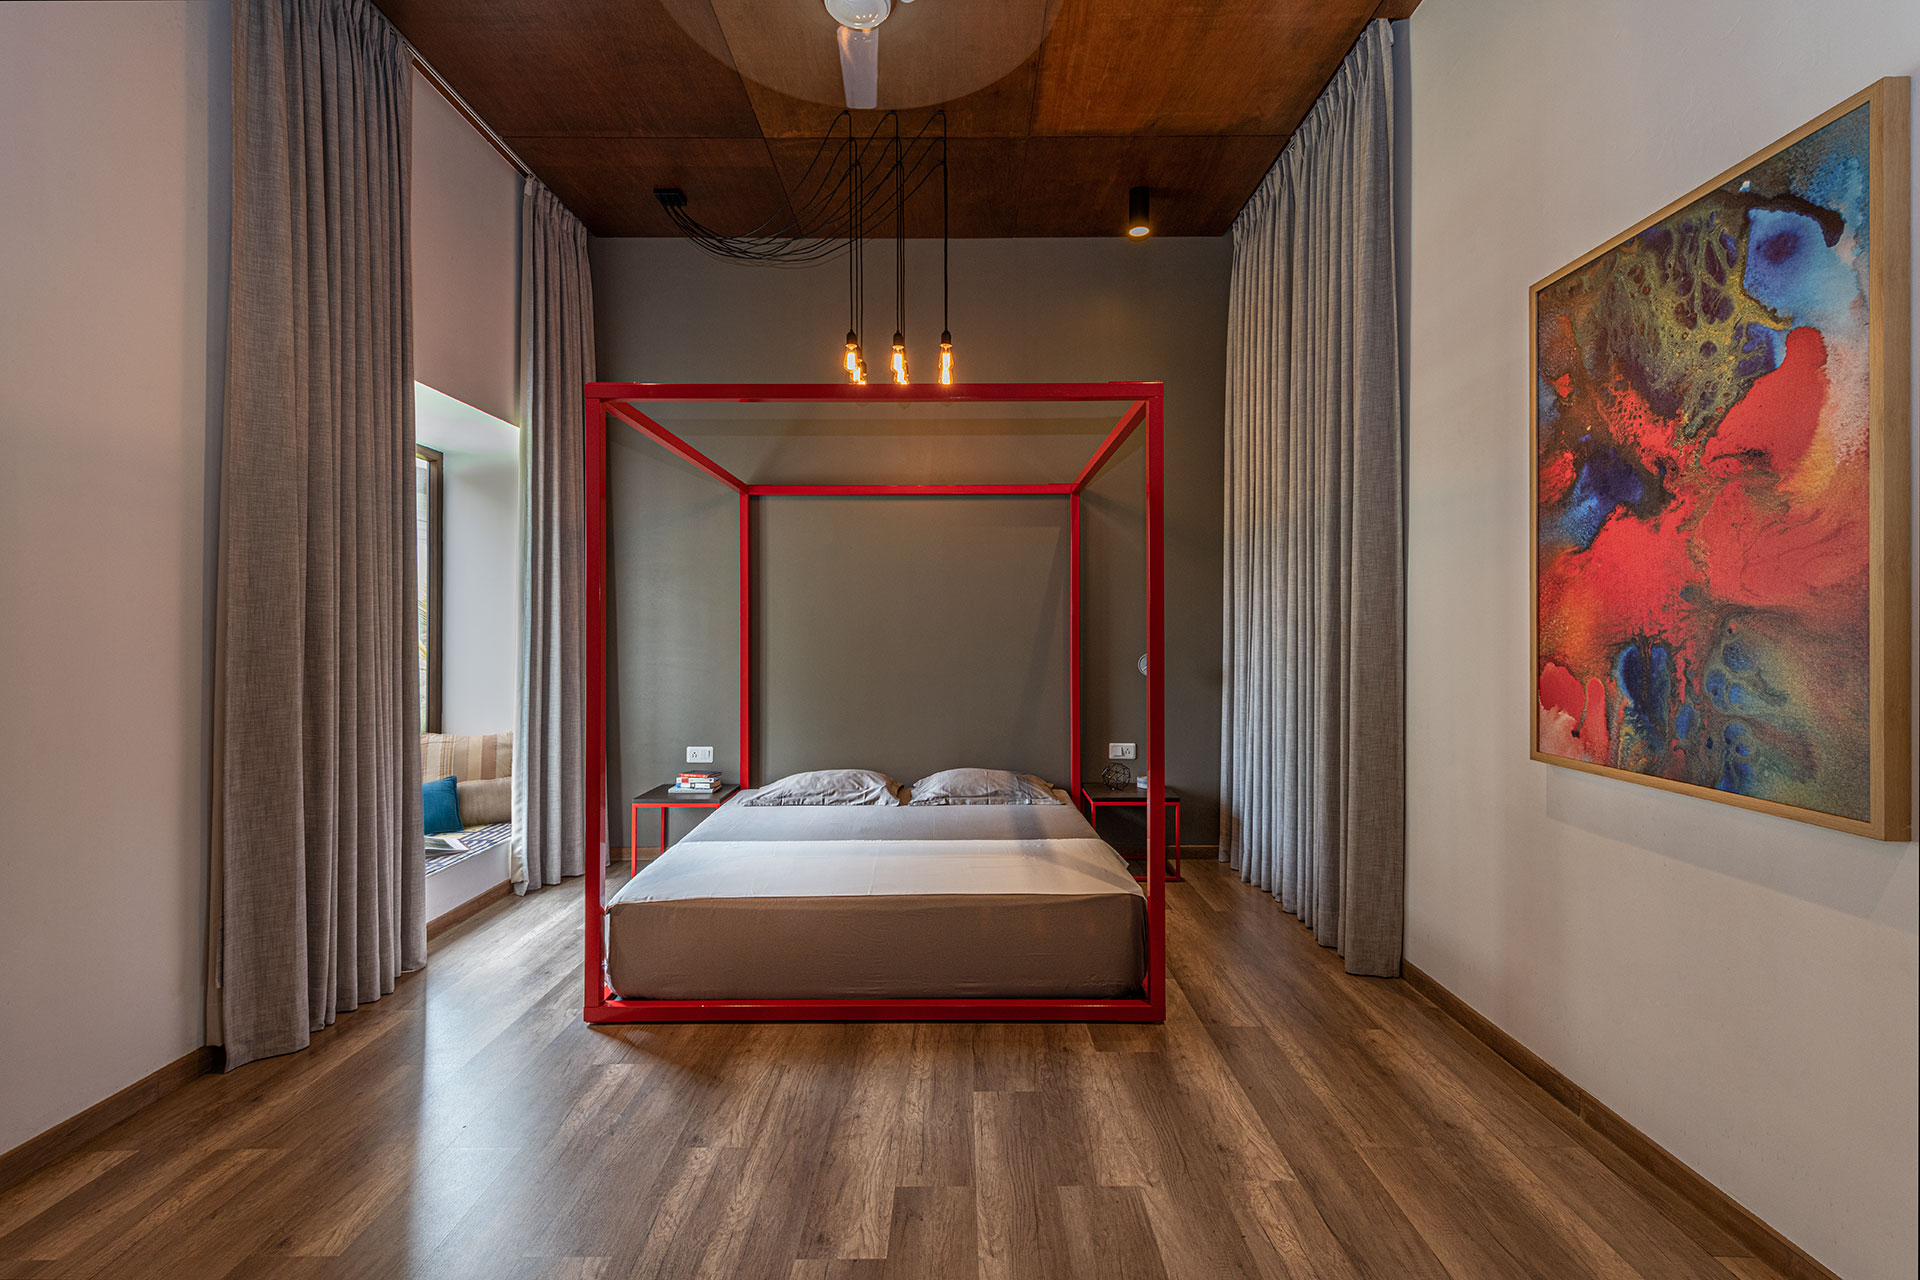 The Red bedroom, with its four poster bed, and hanging light bulbs suspended from a ceiling of polished exposed plywood.